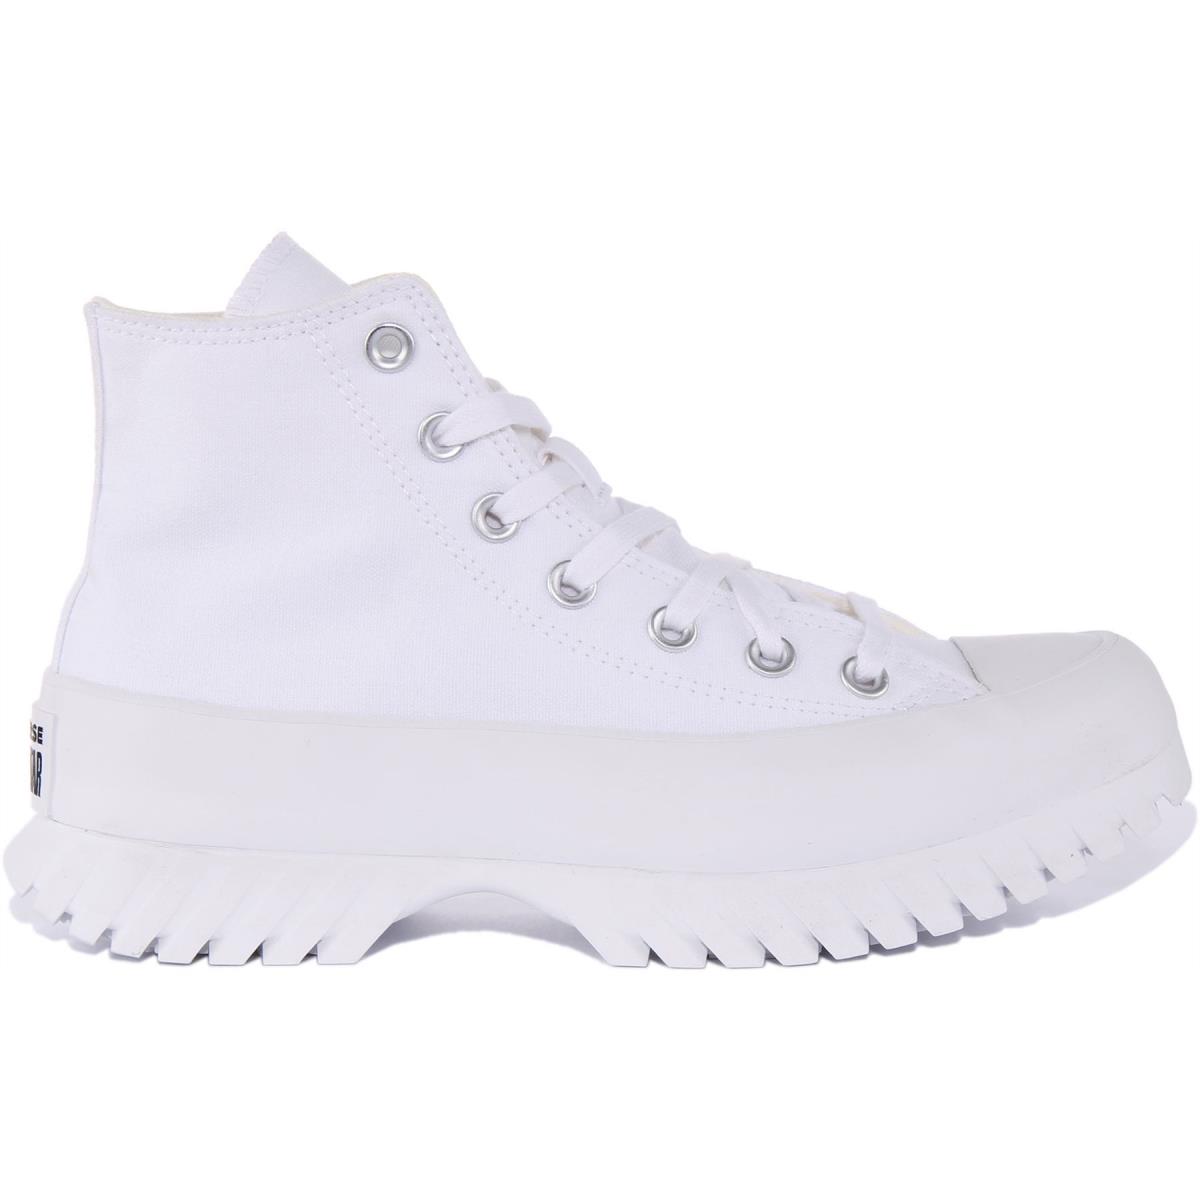 Converse A00871C Lugged 2.0 Hi Womens Sneakers In White Size US 5 - 11